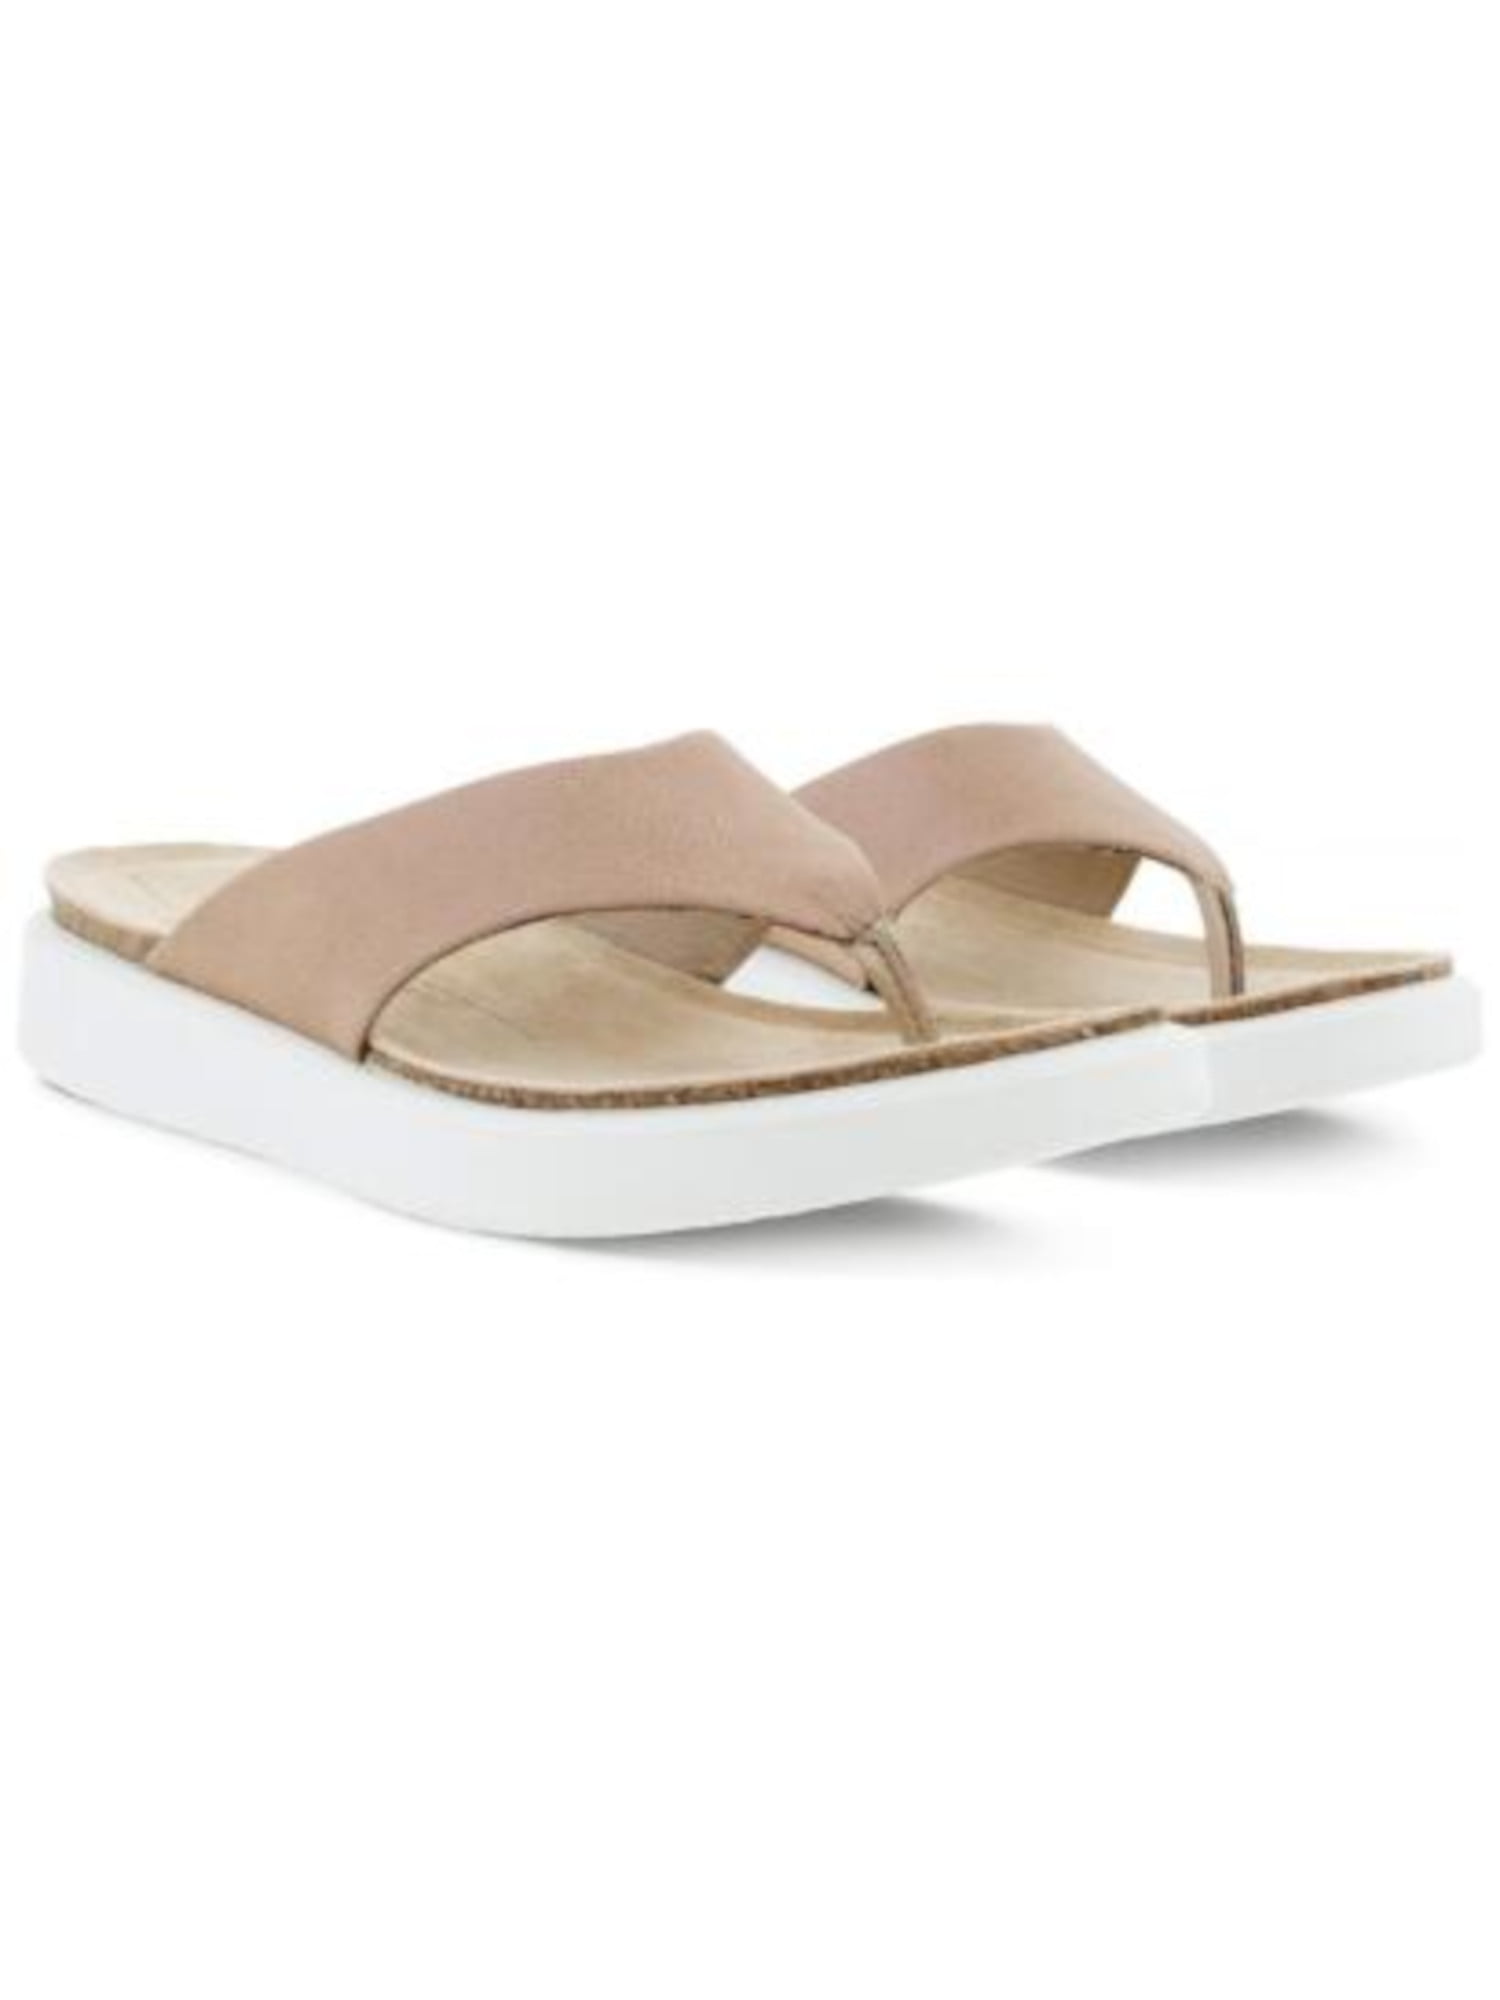 ECCO Beige Arch Support Cushioned Round Toe Wedge Slip On Leather Thong Sandals - Walmart.com